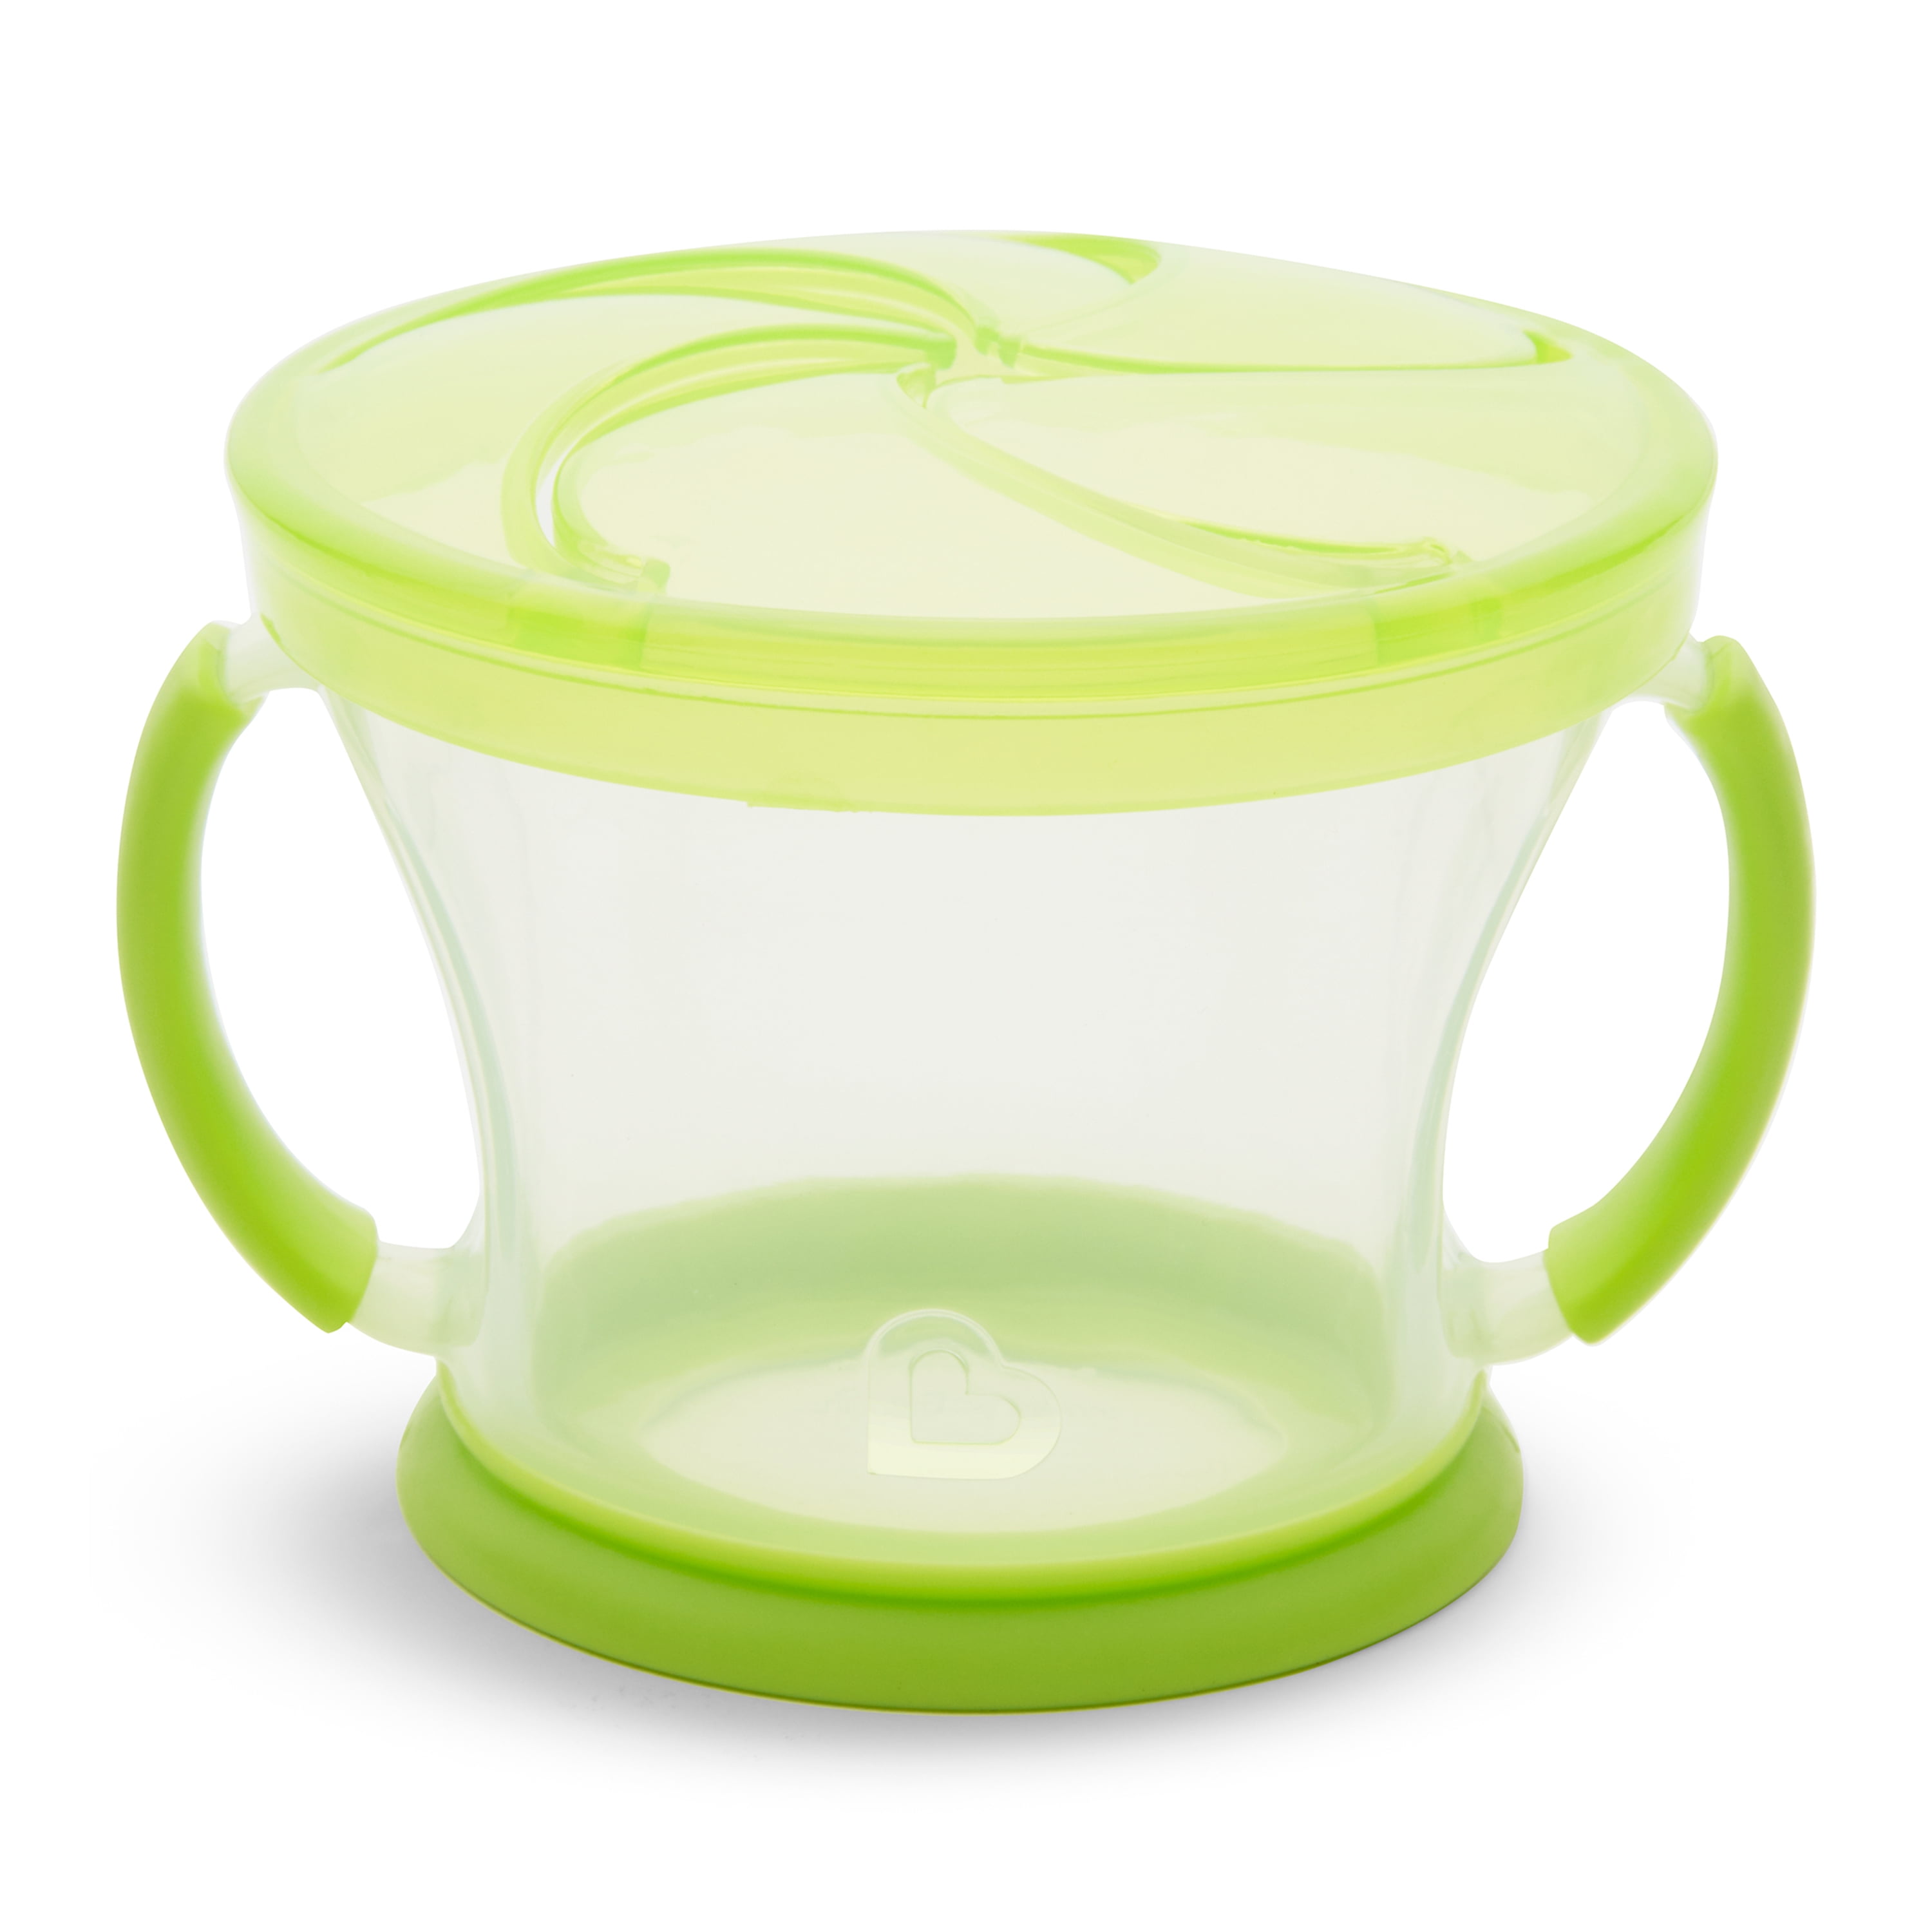 Best Snack Catcher And Drink Cup Wholesale, Kids Snack Container Kean